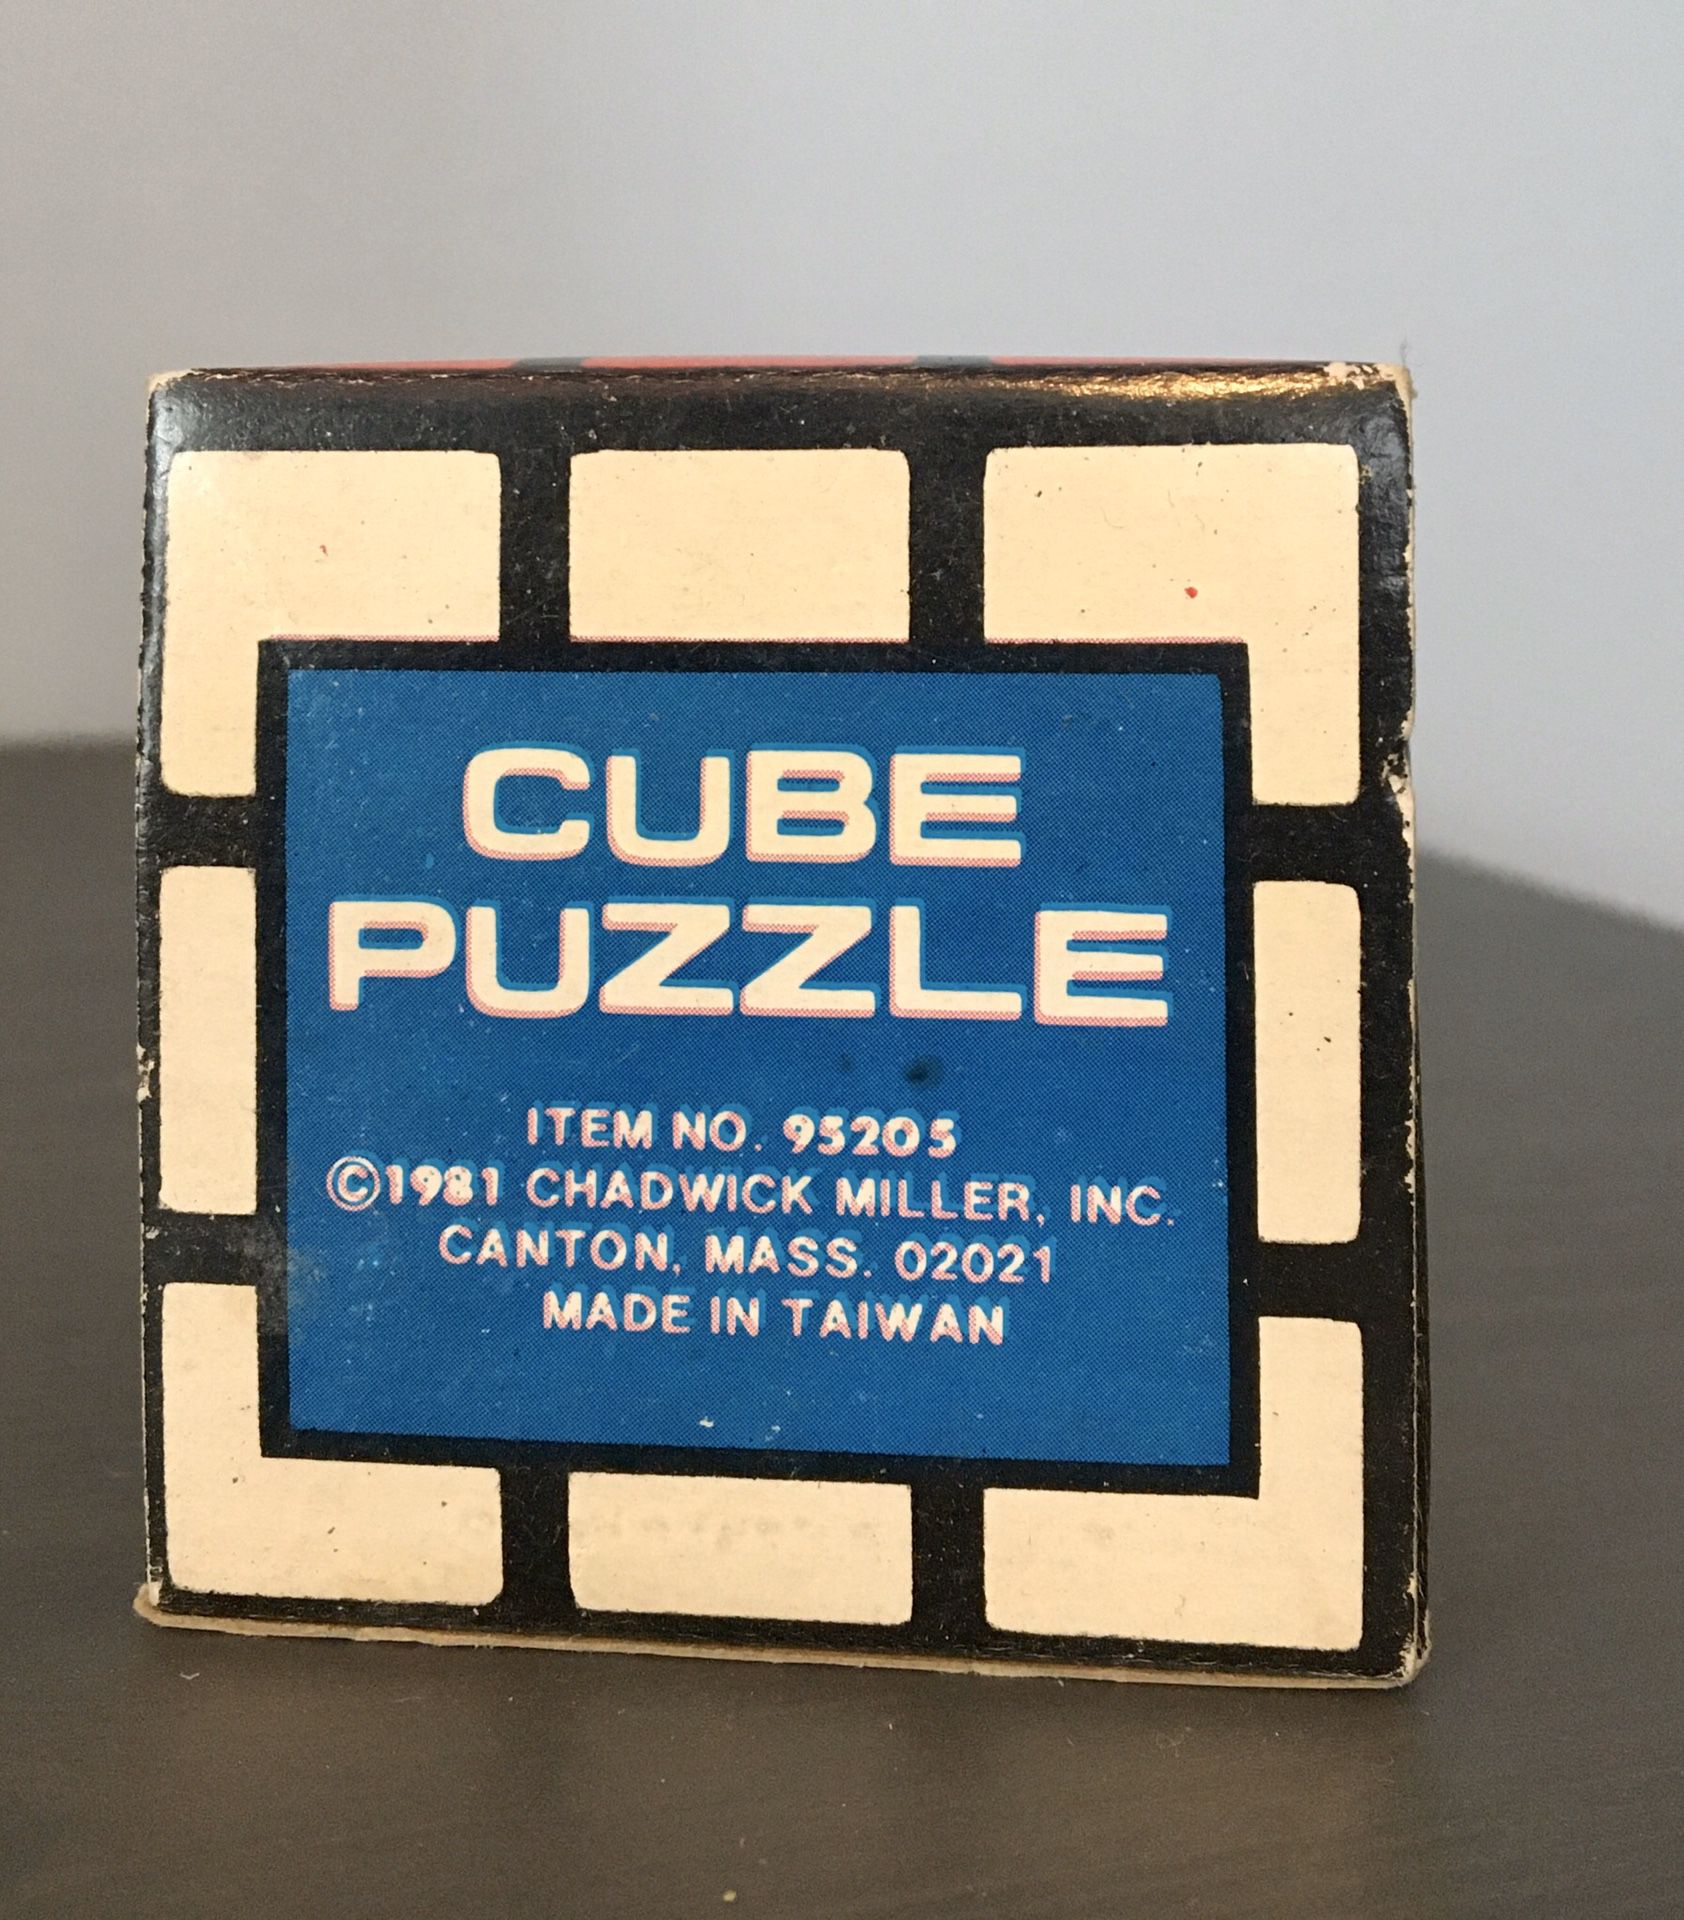 1981 Cube Puzzle by Chadwick Miller, Inc with original box